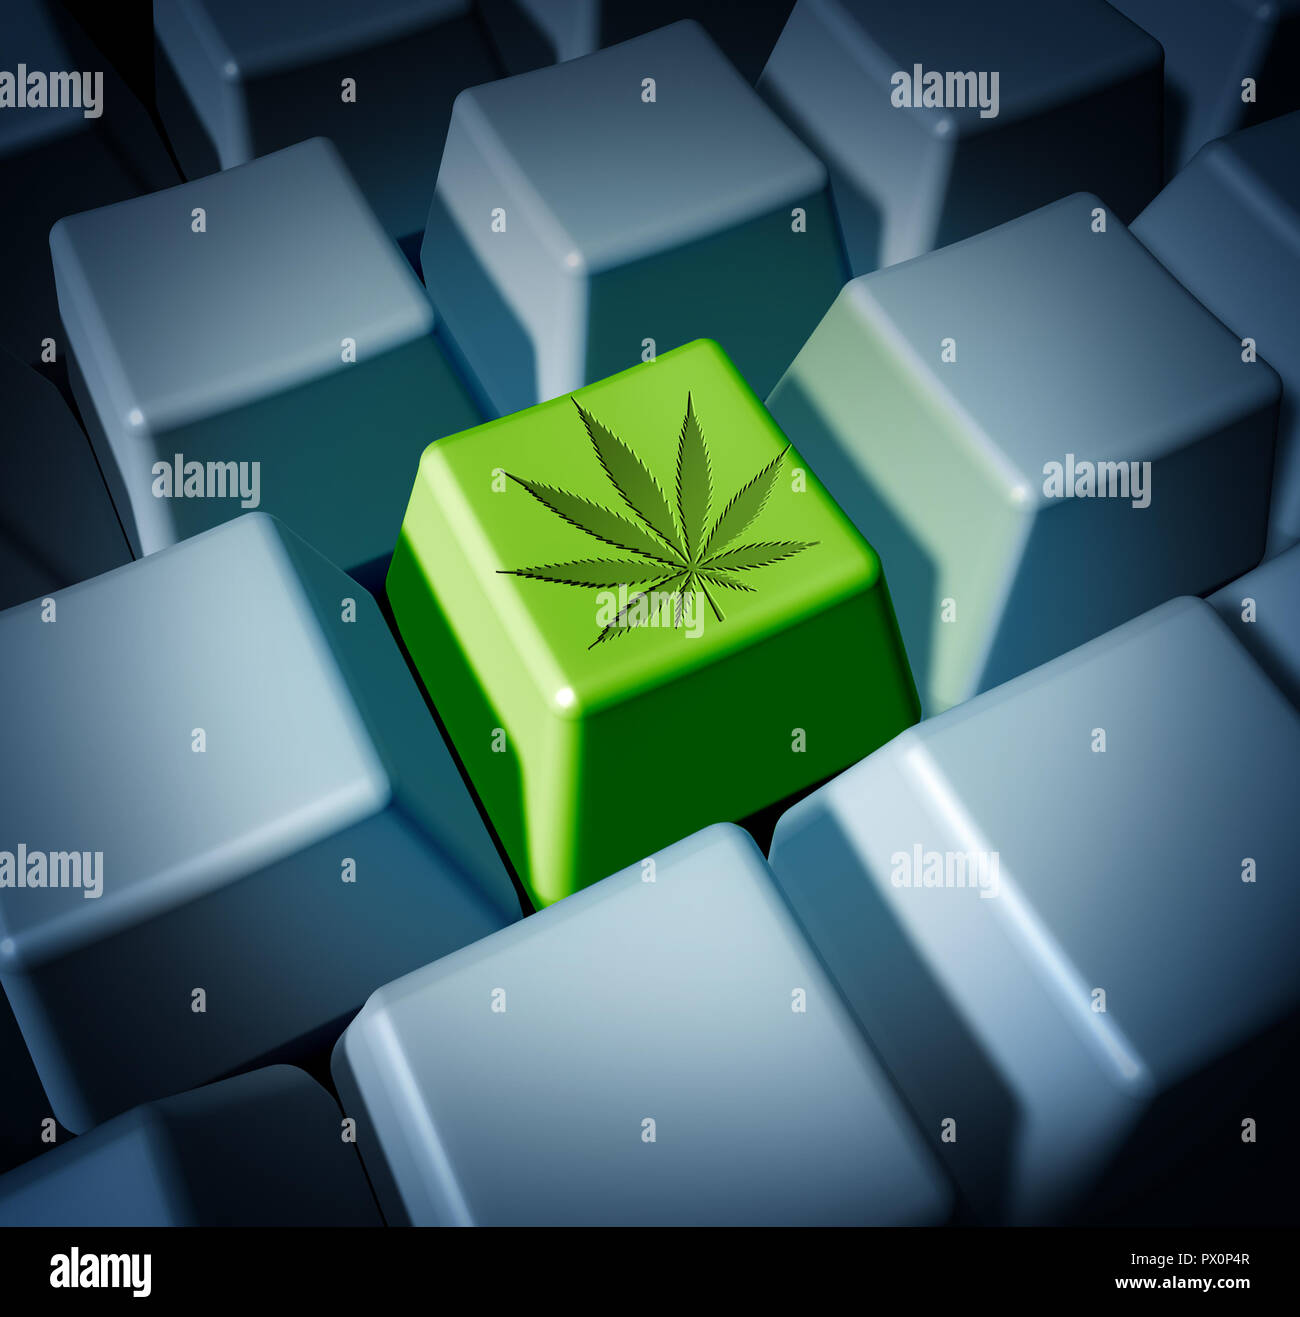 Cannabis online purchase of legal marijuana through e commerce and internet weed sales concept as a keyboard with medical or recreational pot. Stock Photo